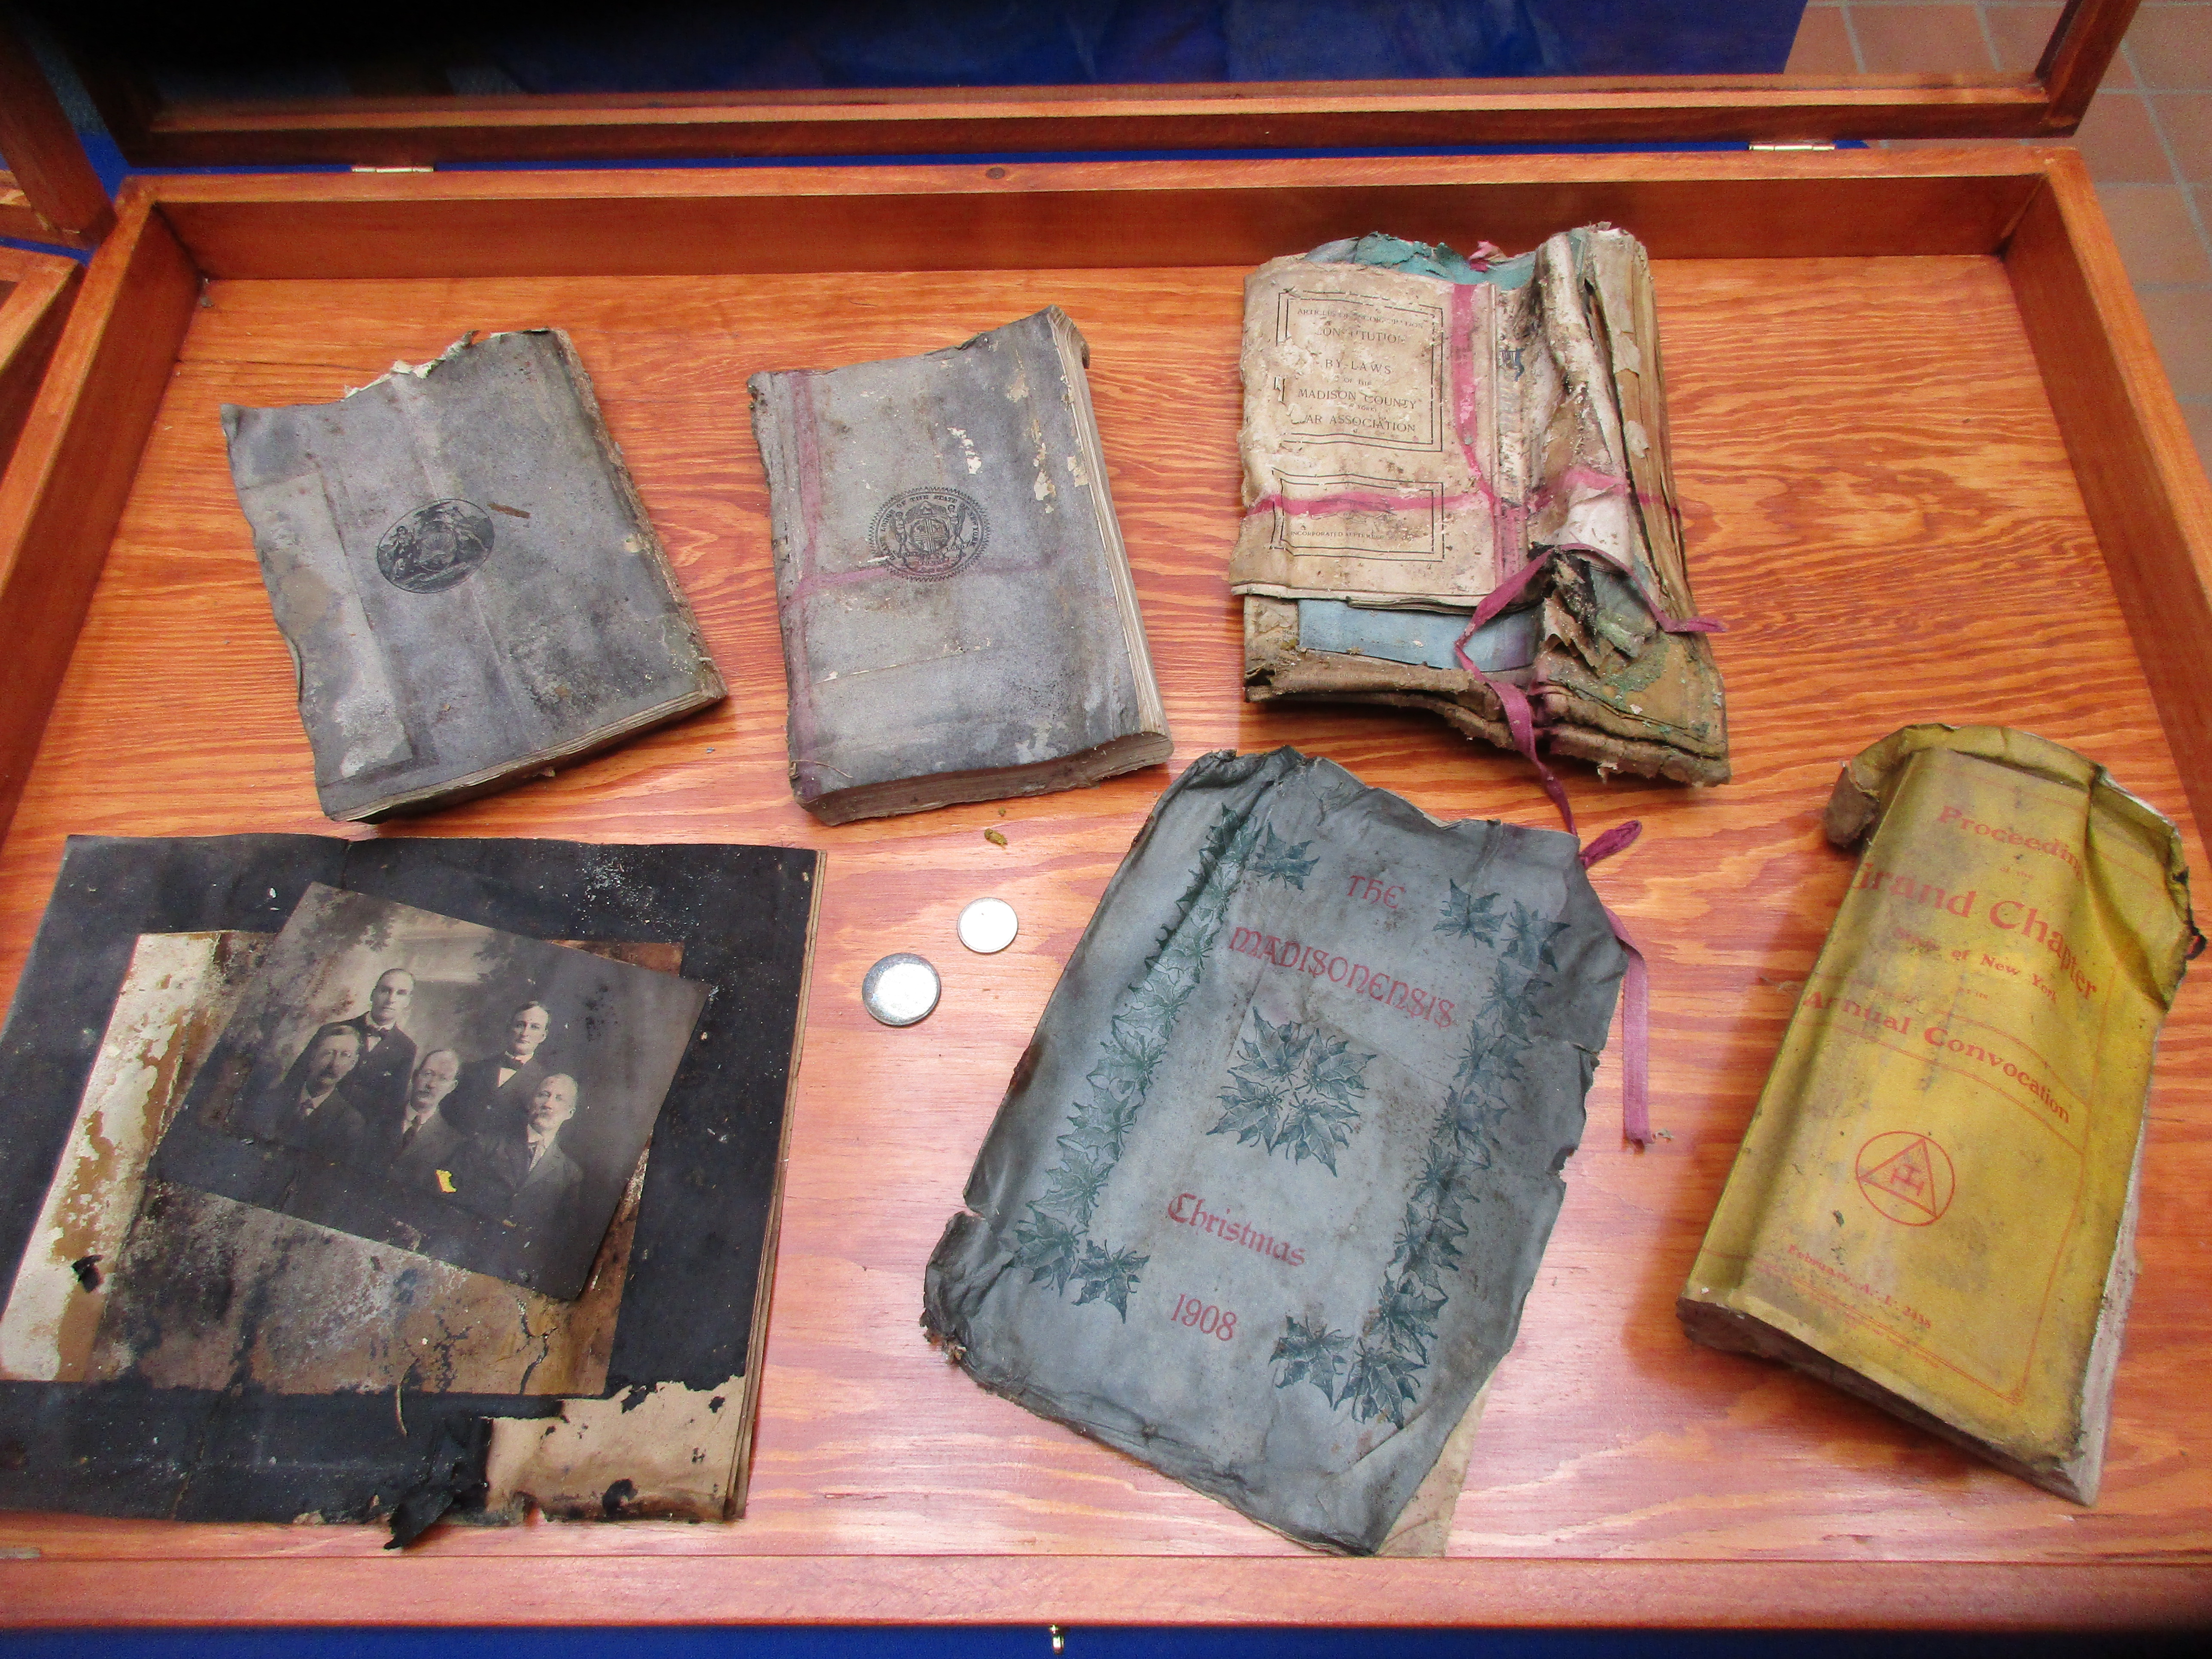 Six old, warped and water damaged books sit in a display case, along with two old coins and some old photos.